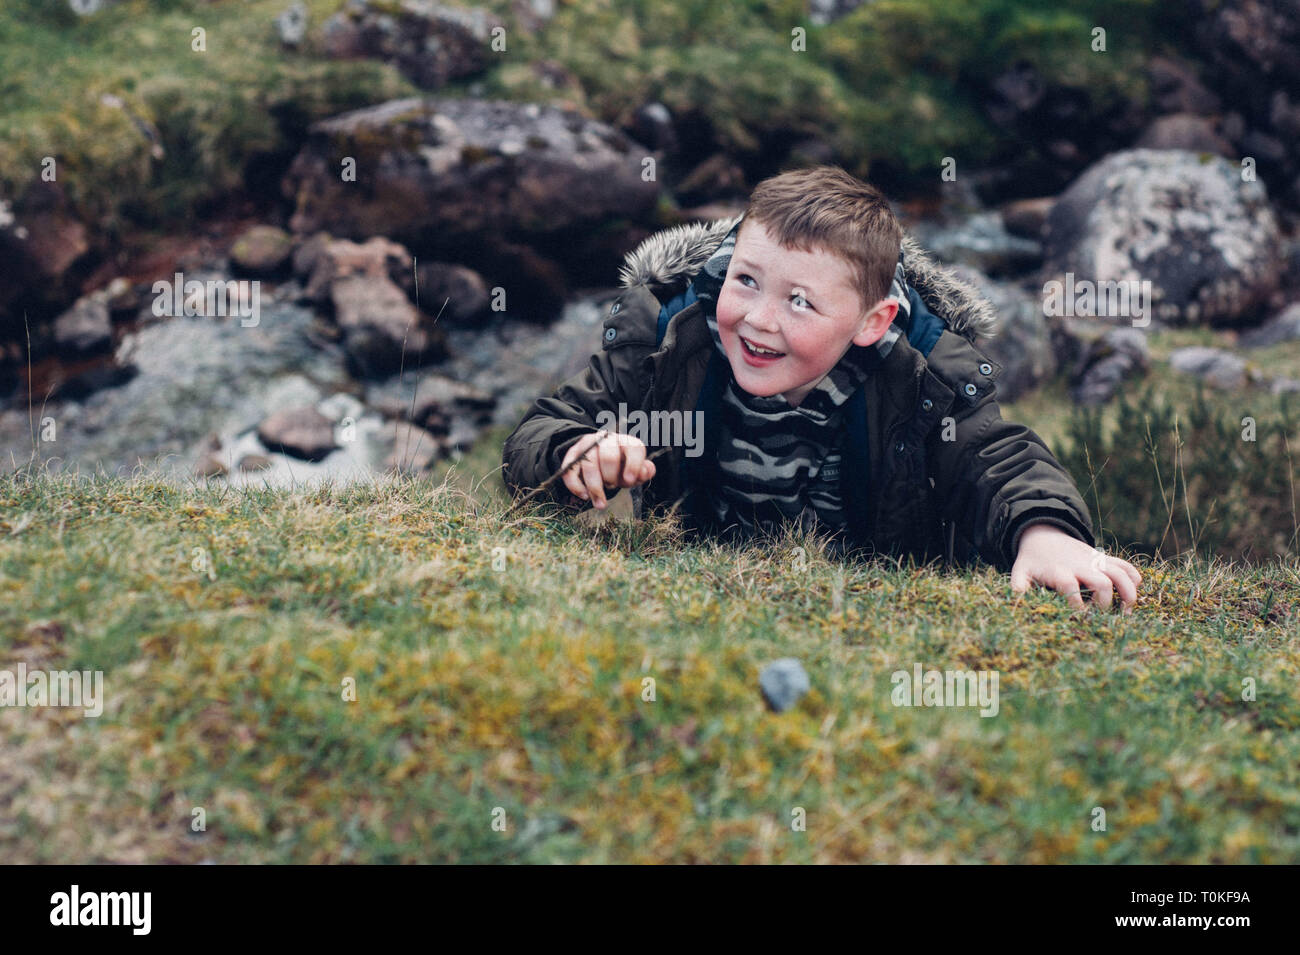 Small 7,8,9 year old boy smiling and climbing outdoors Stock Photo